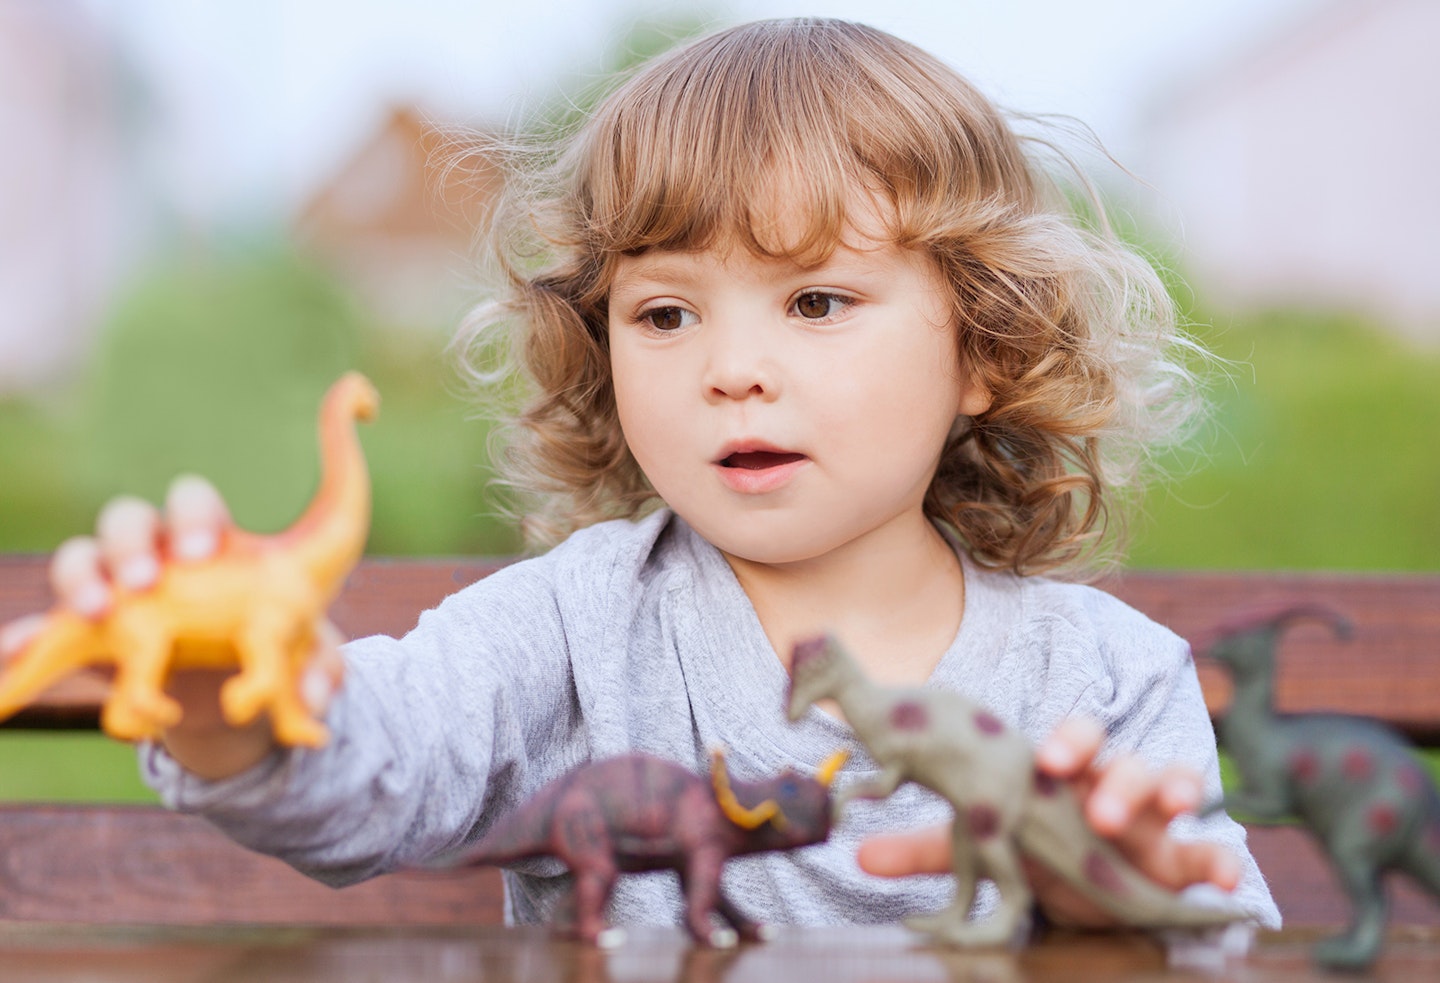 Children who are obsessed with dinosaurs are more intelligent, says study